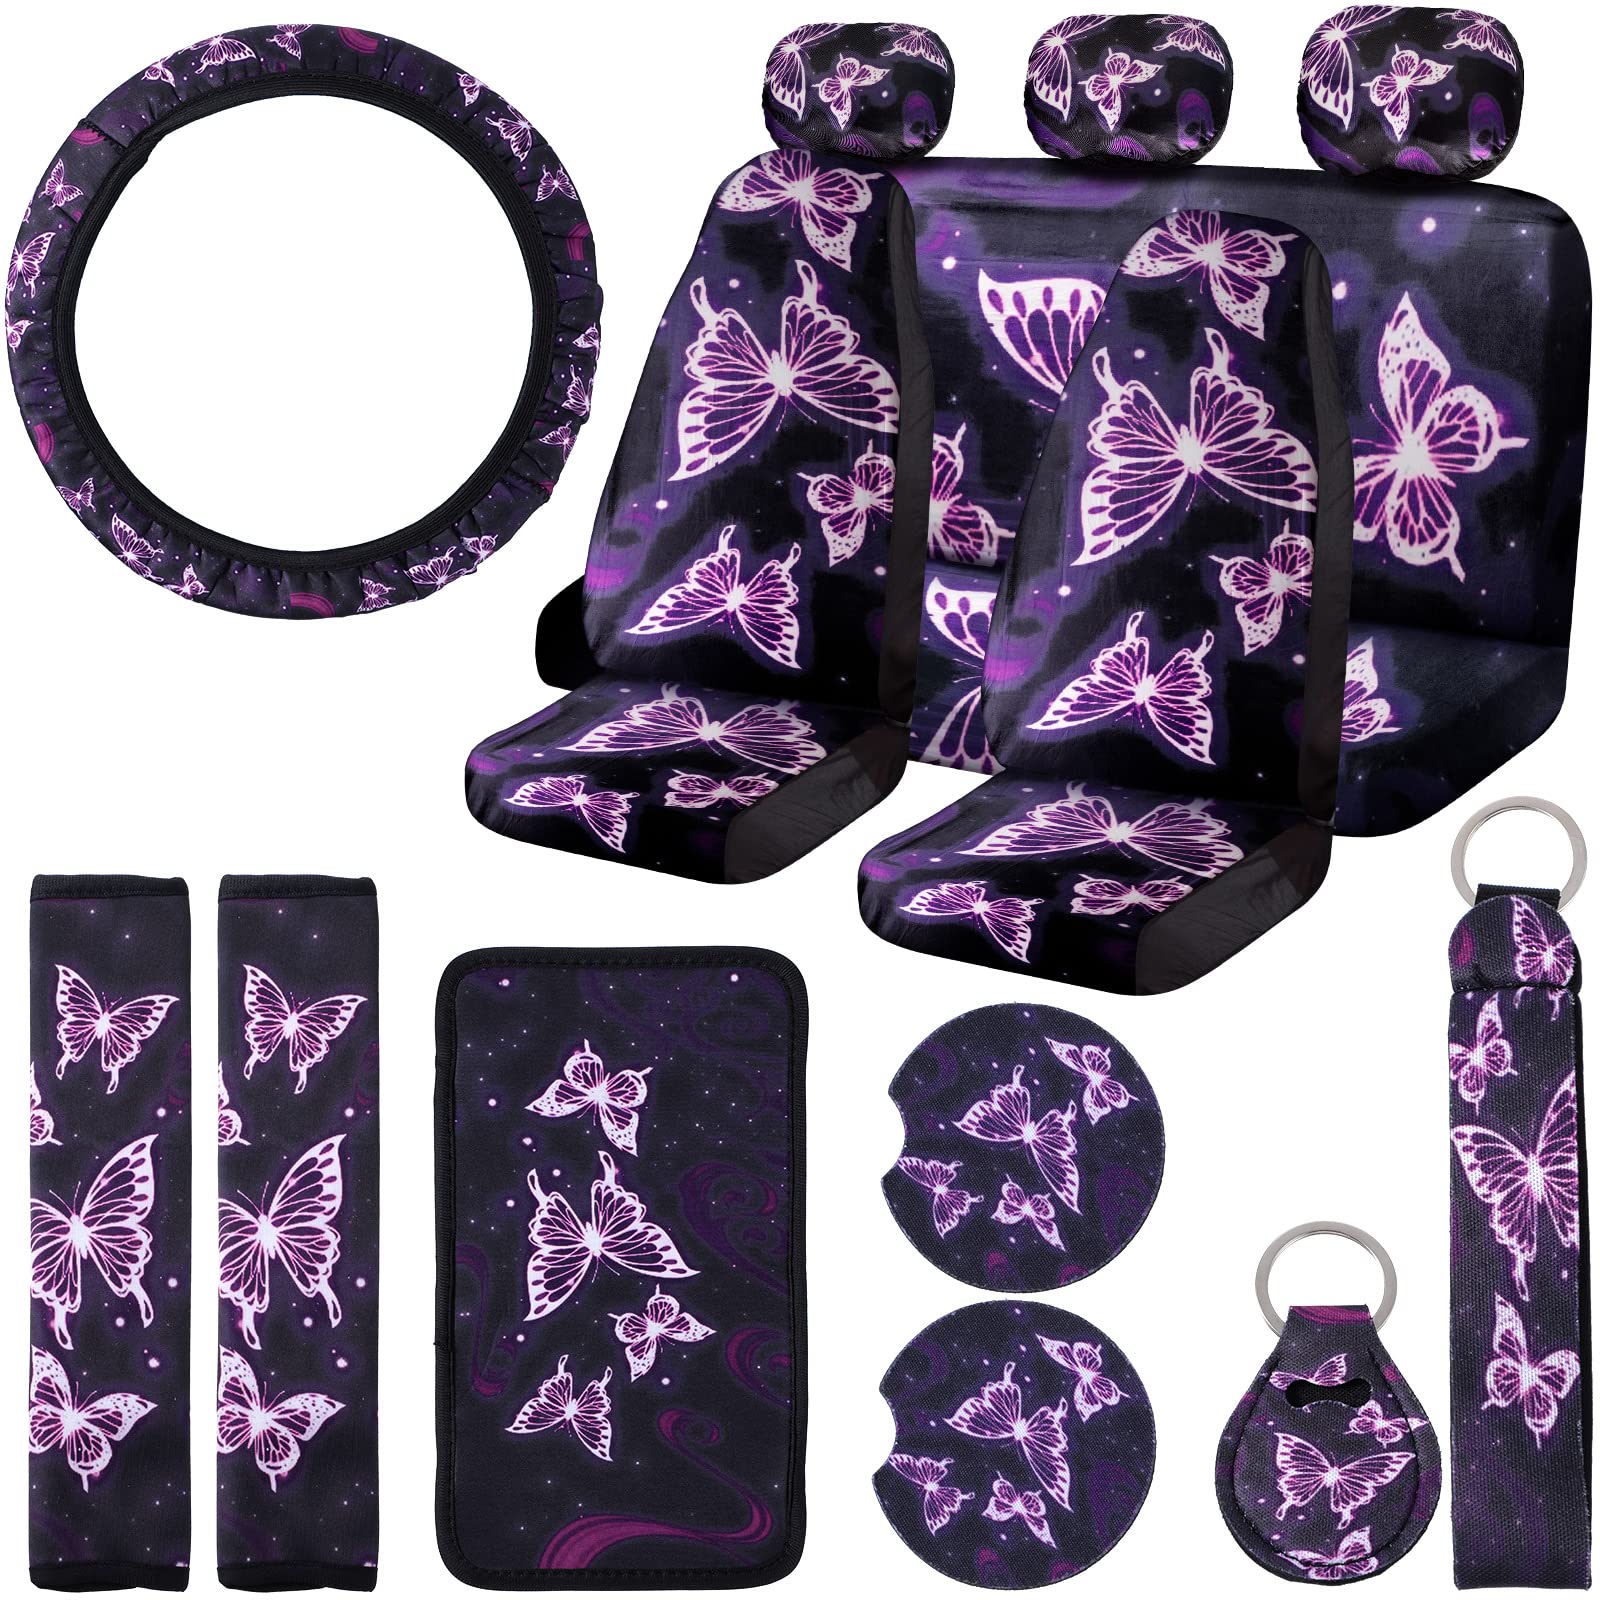 15 Pieces Purple Butterfly Car Seat Covers Full Set, Butterfly Car Accessories Set Steering Wheel Cover Center Console Armrest Pad Headrest Seat Belt Cover Keyring Coaster for Cars SUV Interior Decor